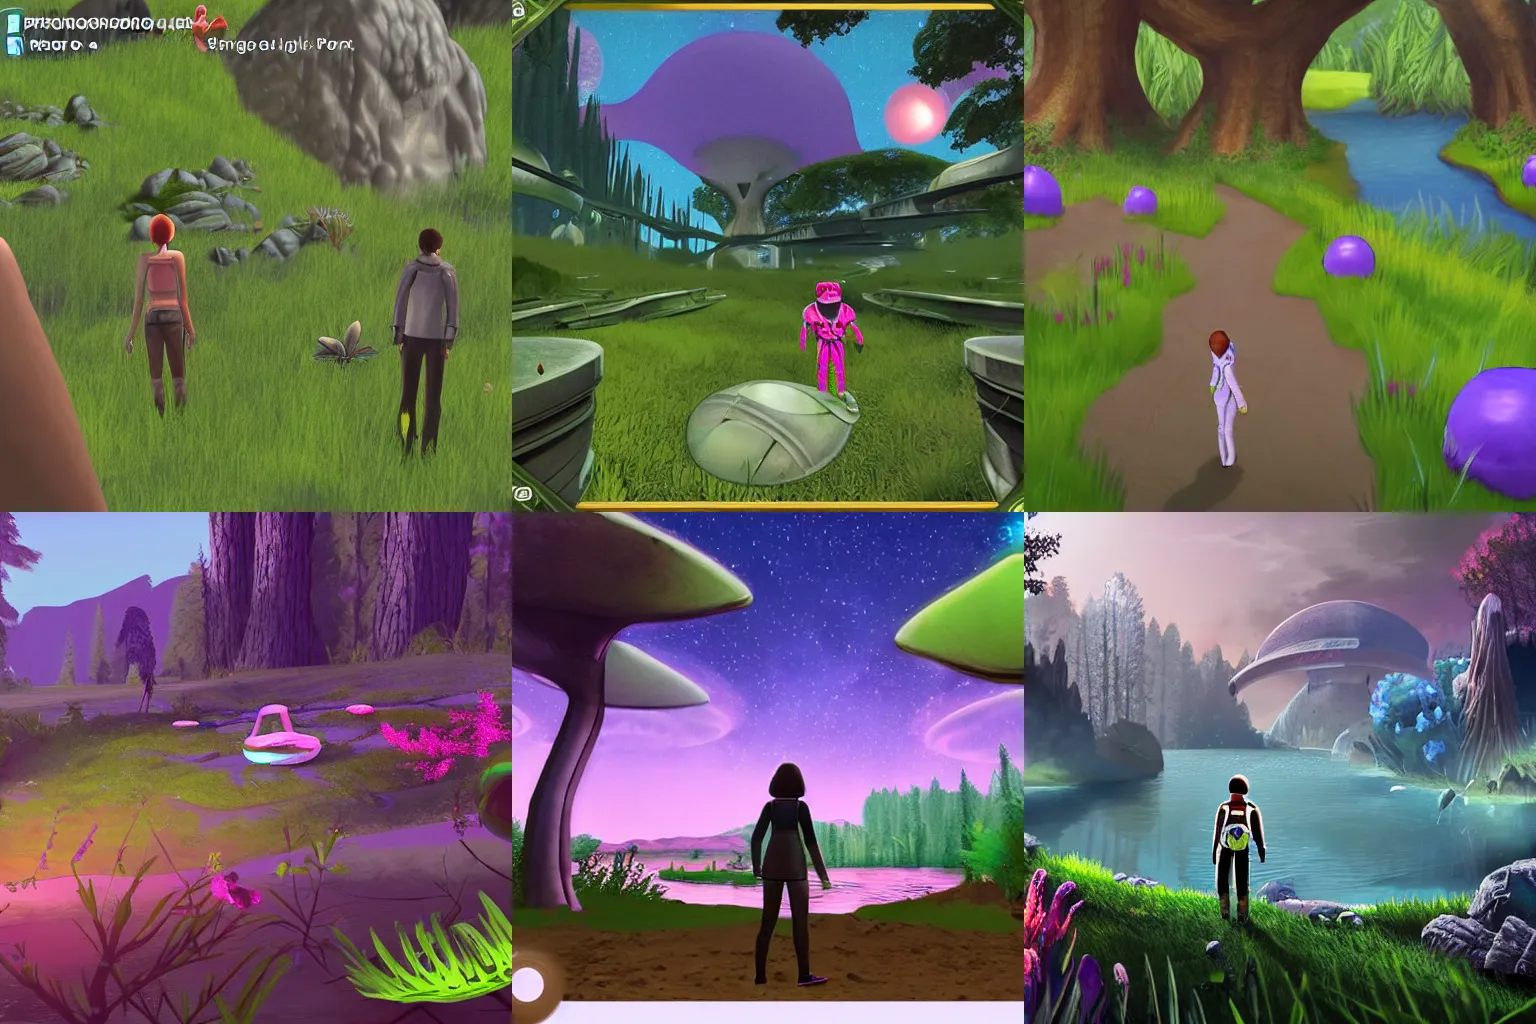 Prompt: third person view, in a park and next to a lake, in a small town on an alien planet, with strange alien plants and flowers, from a space themed Serria point and click 2D graphic adventure game, made in 2019, high quality graphics